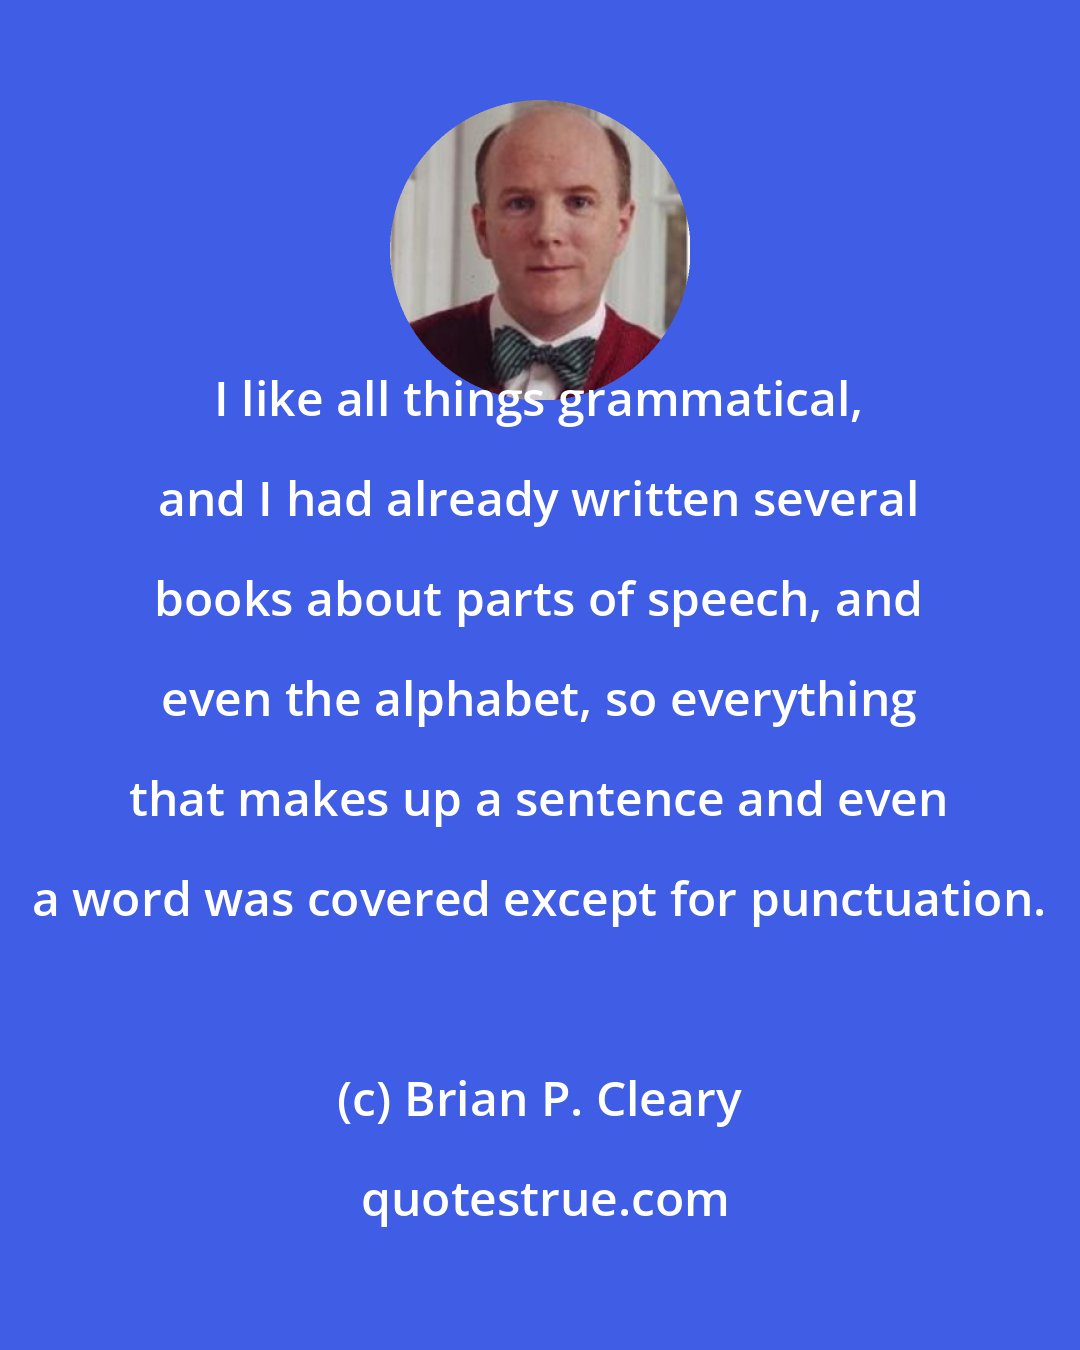 Brian P. Cleary: I like all things grammatical, and I had already written several books about parts of speech, and even the alphabet, so everything that makes up a sentence and even a word was covered except for punctuation.